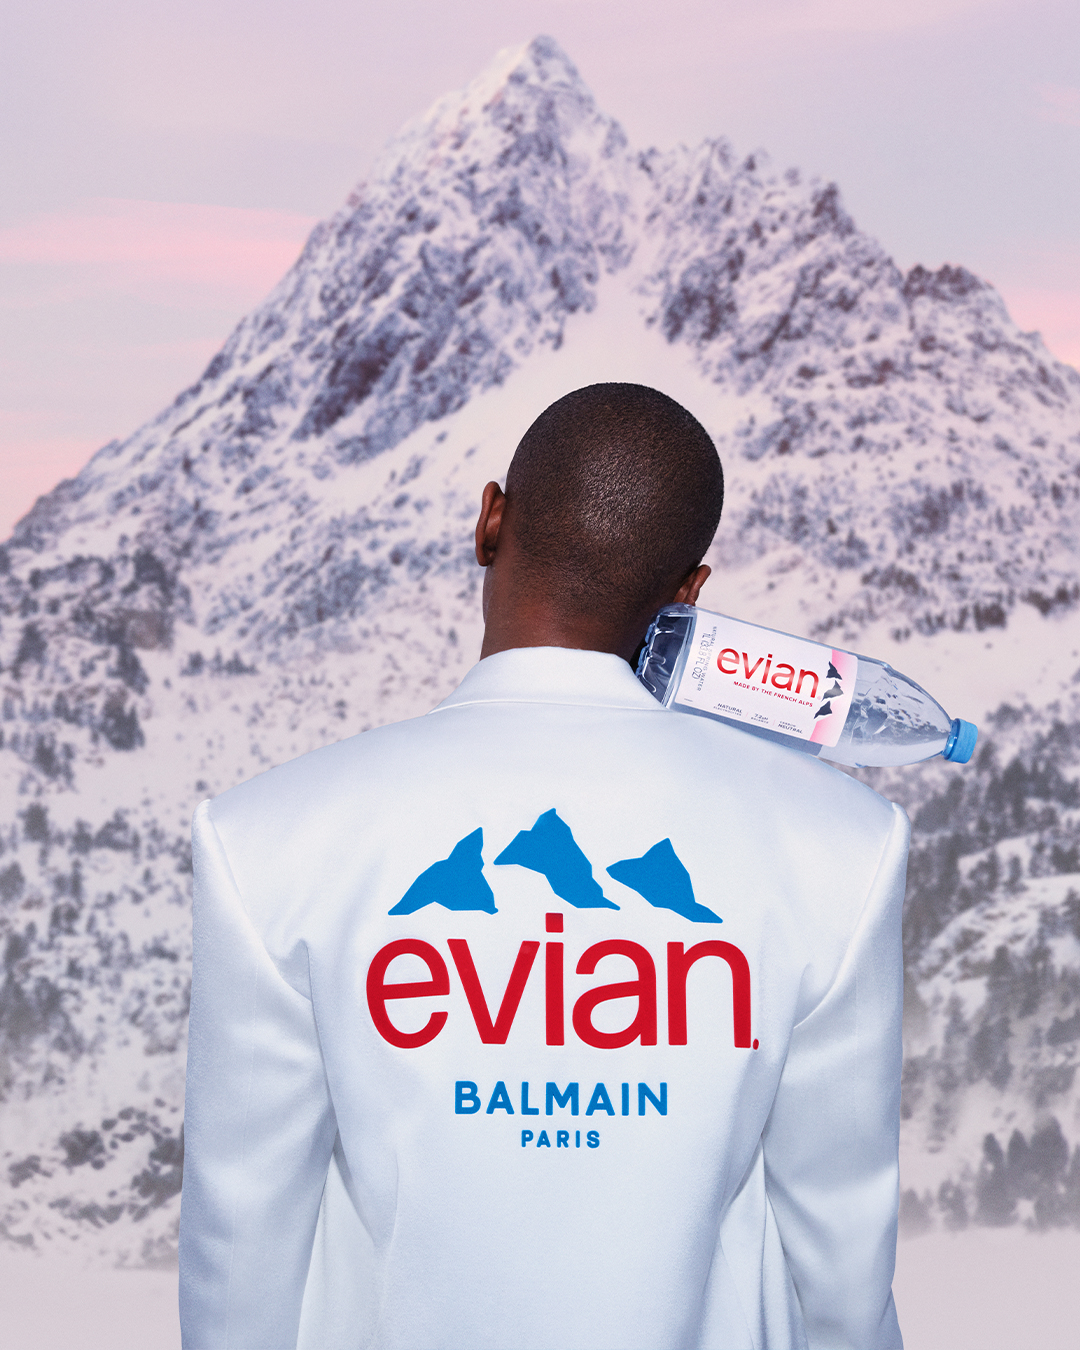 evian - Limited Edition - Le Bon Marché - VERSUS Fully Tailored Creation